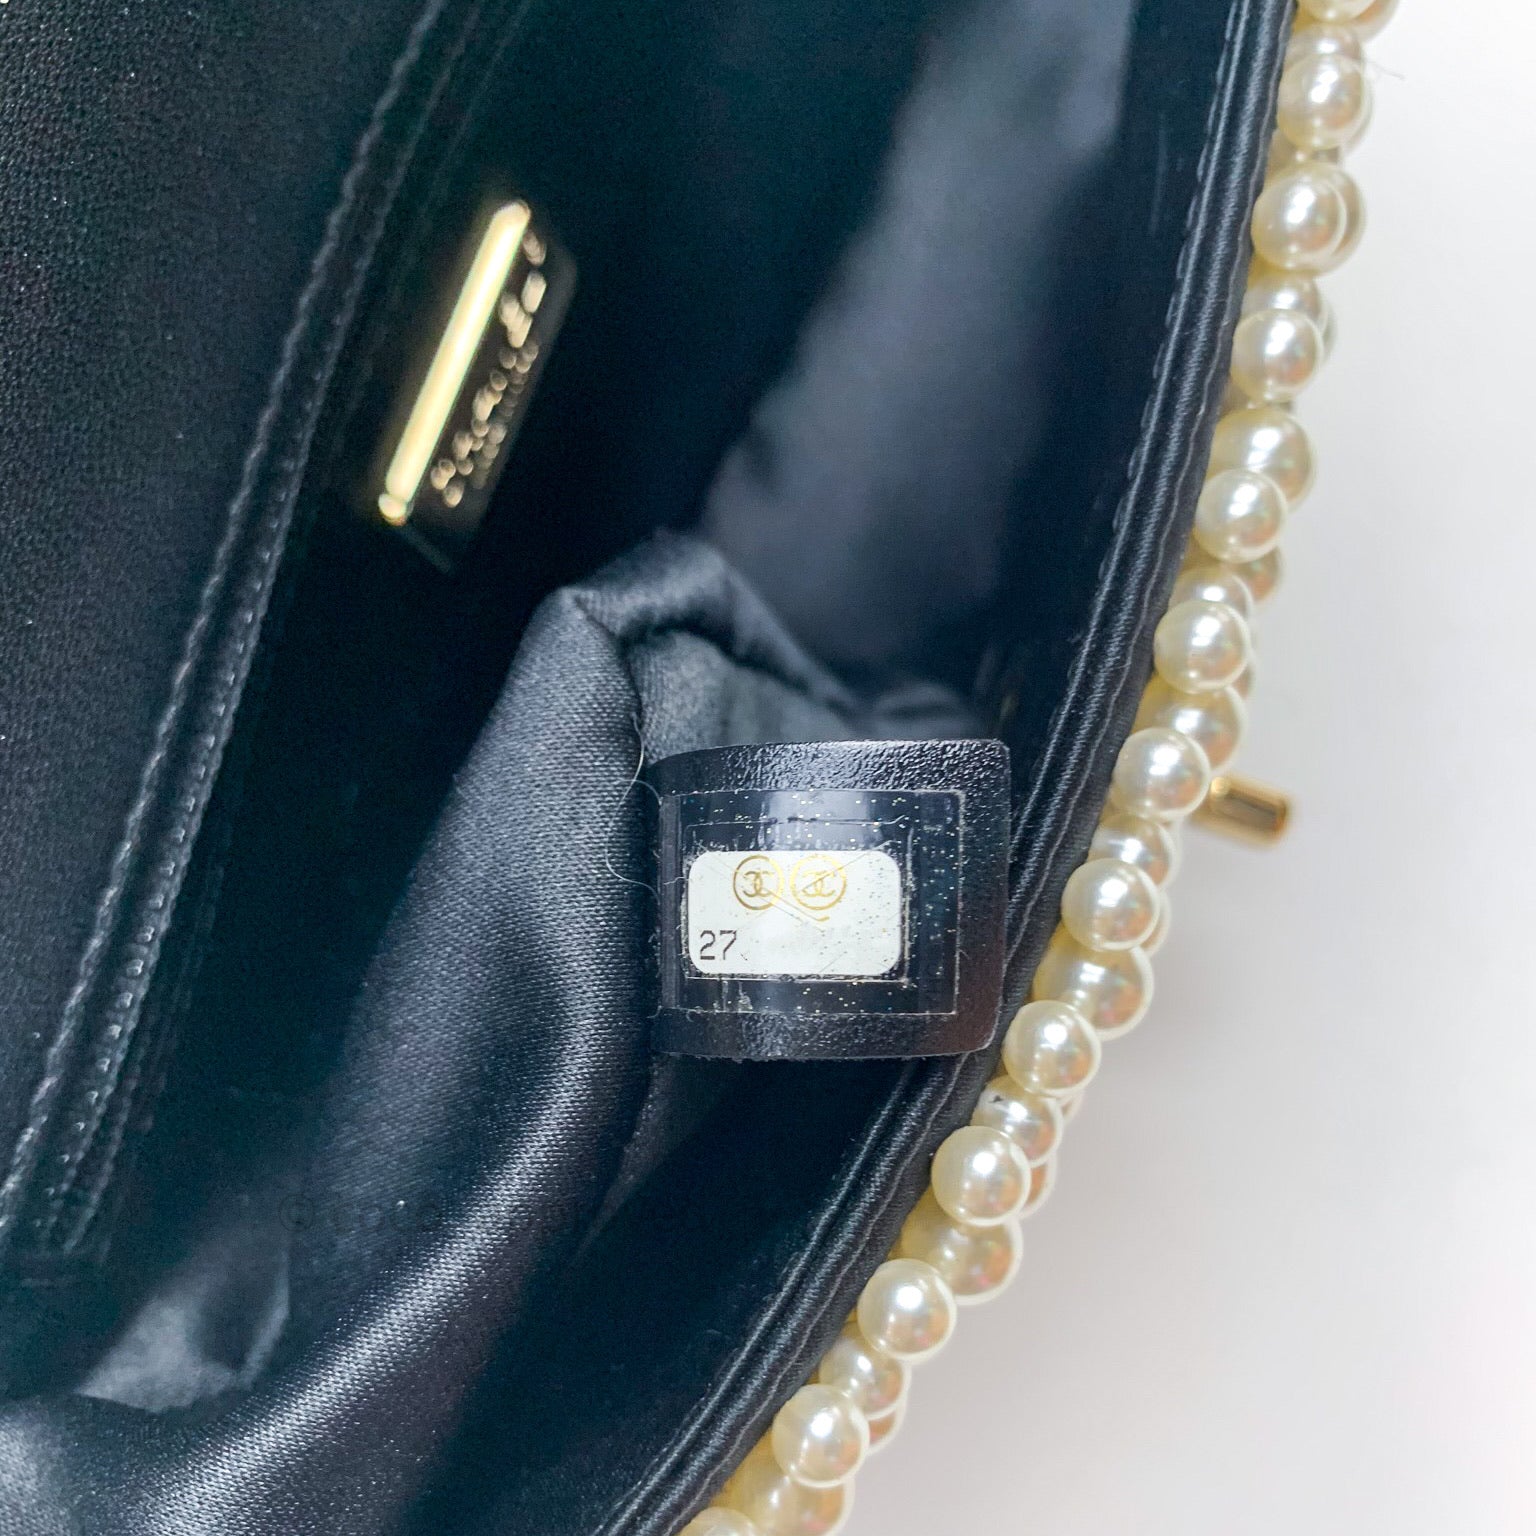 Chanel Pearl Mini Rectangular Flap Bag 19S – Coco Approved Studio